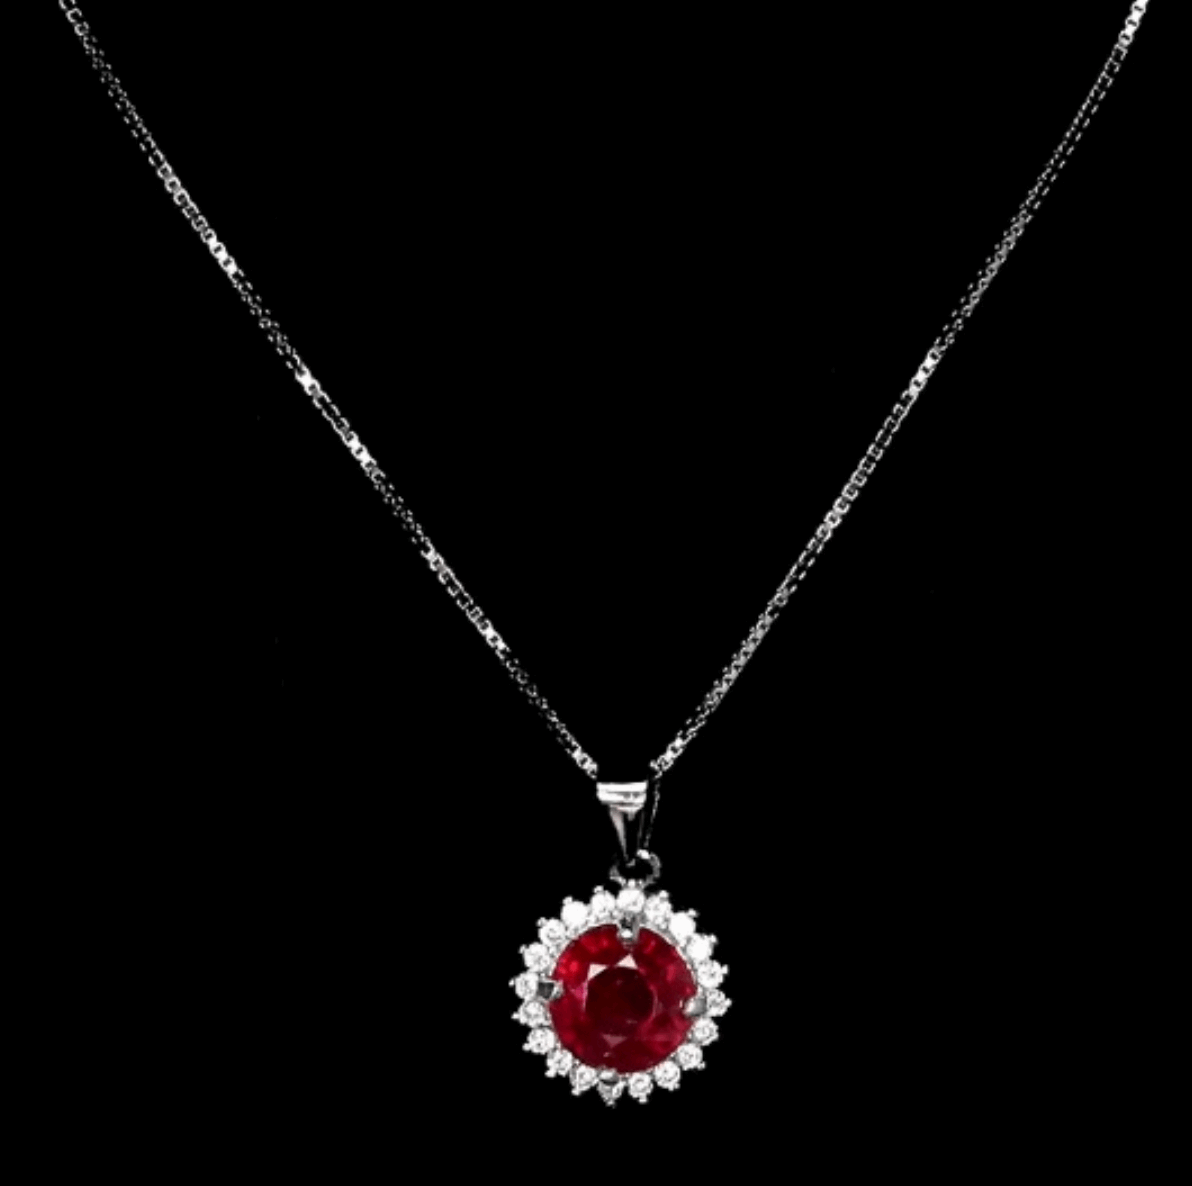 Deluxe Natural Red Pink Ruby and White CZ Gemstone Set in Solid .925 Sterling Silver Necklace - BELLADONNA